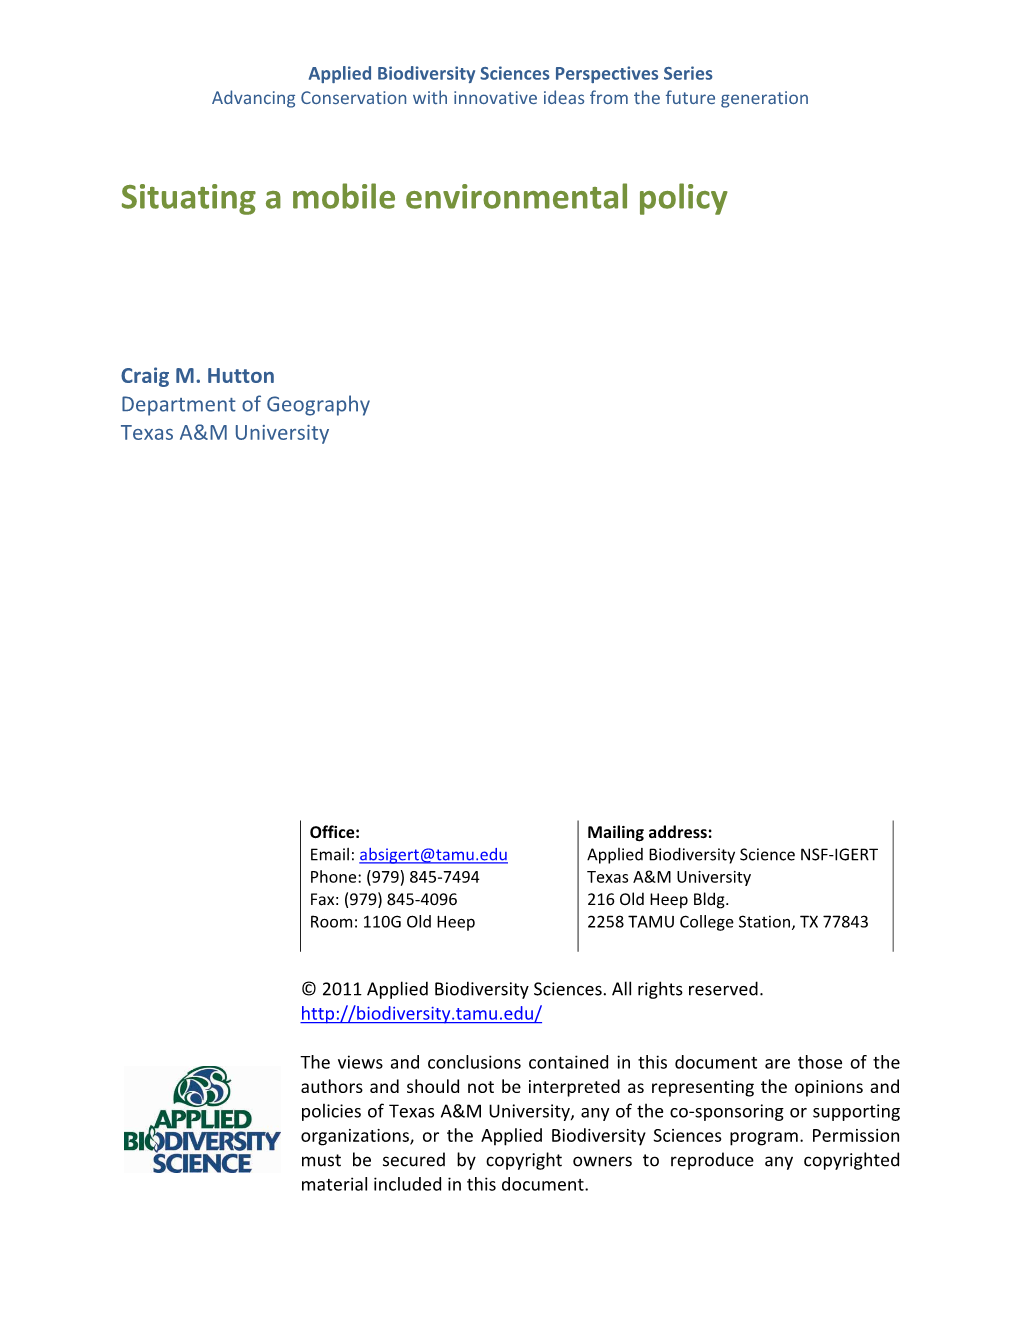 Situating a Mobile Environmental Policy